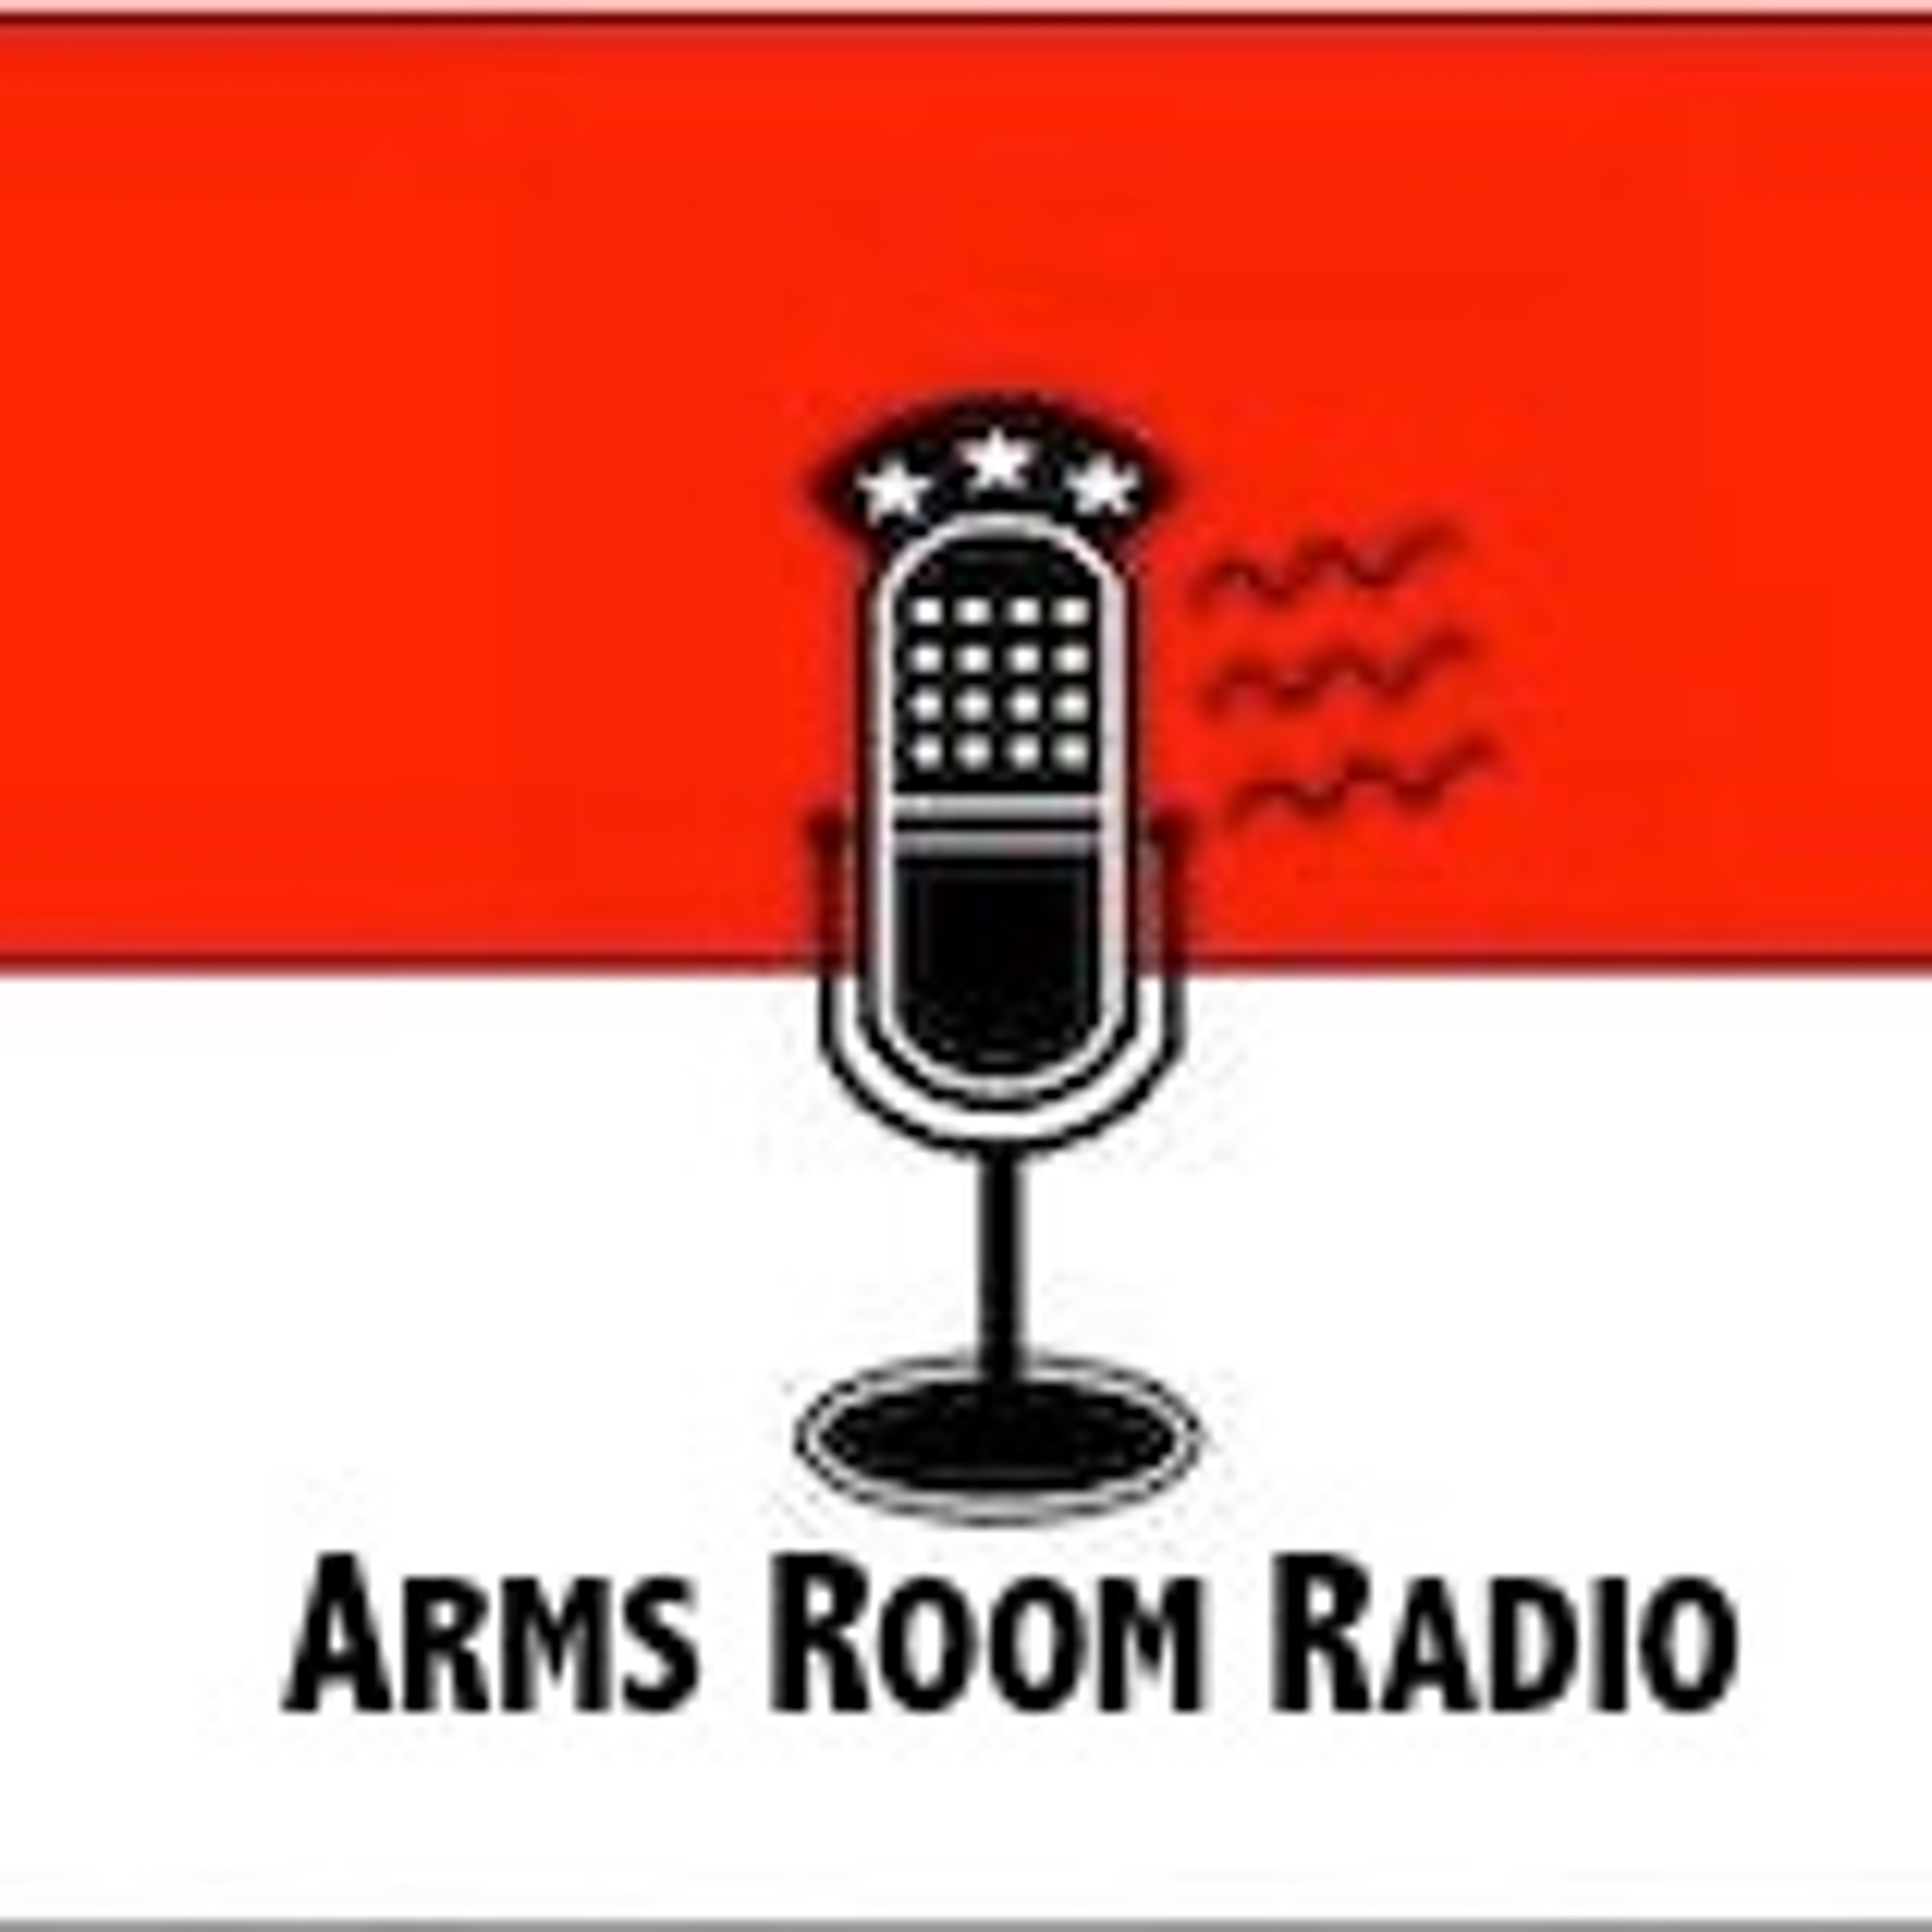 ArmsRoomRadio 03.27.21 Lt. Chad, and Kevin Sona of Florida Carry